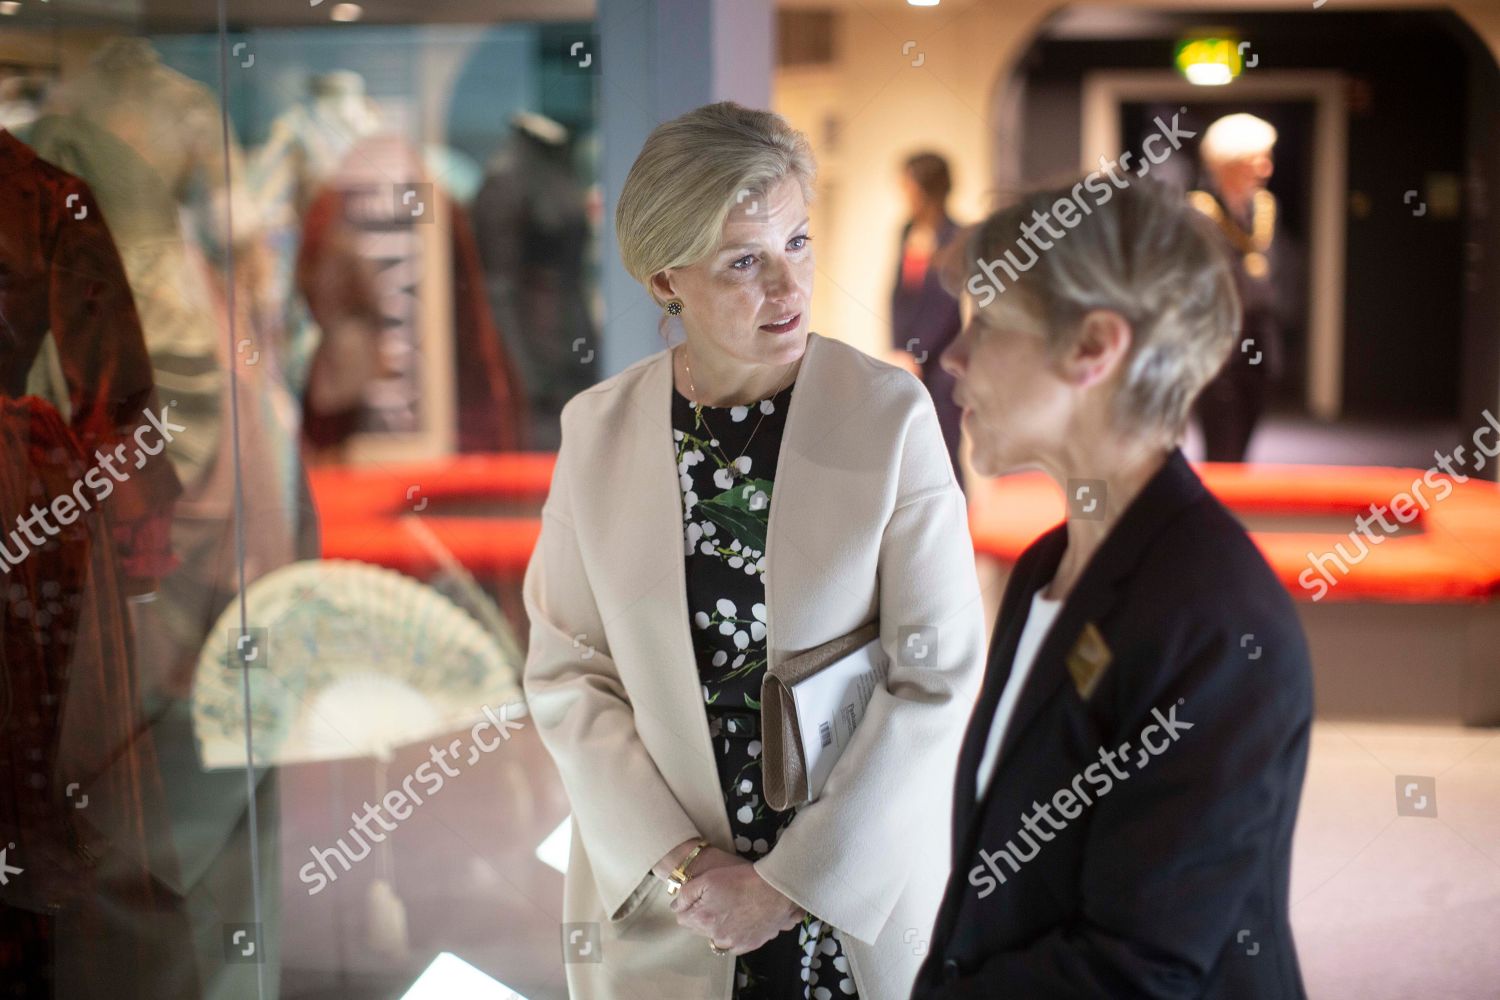 countess-of-wessex-visit-to-somerset-uk-shutterstock-editorial-10120499ab.jpg